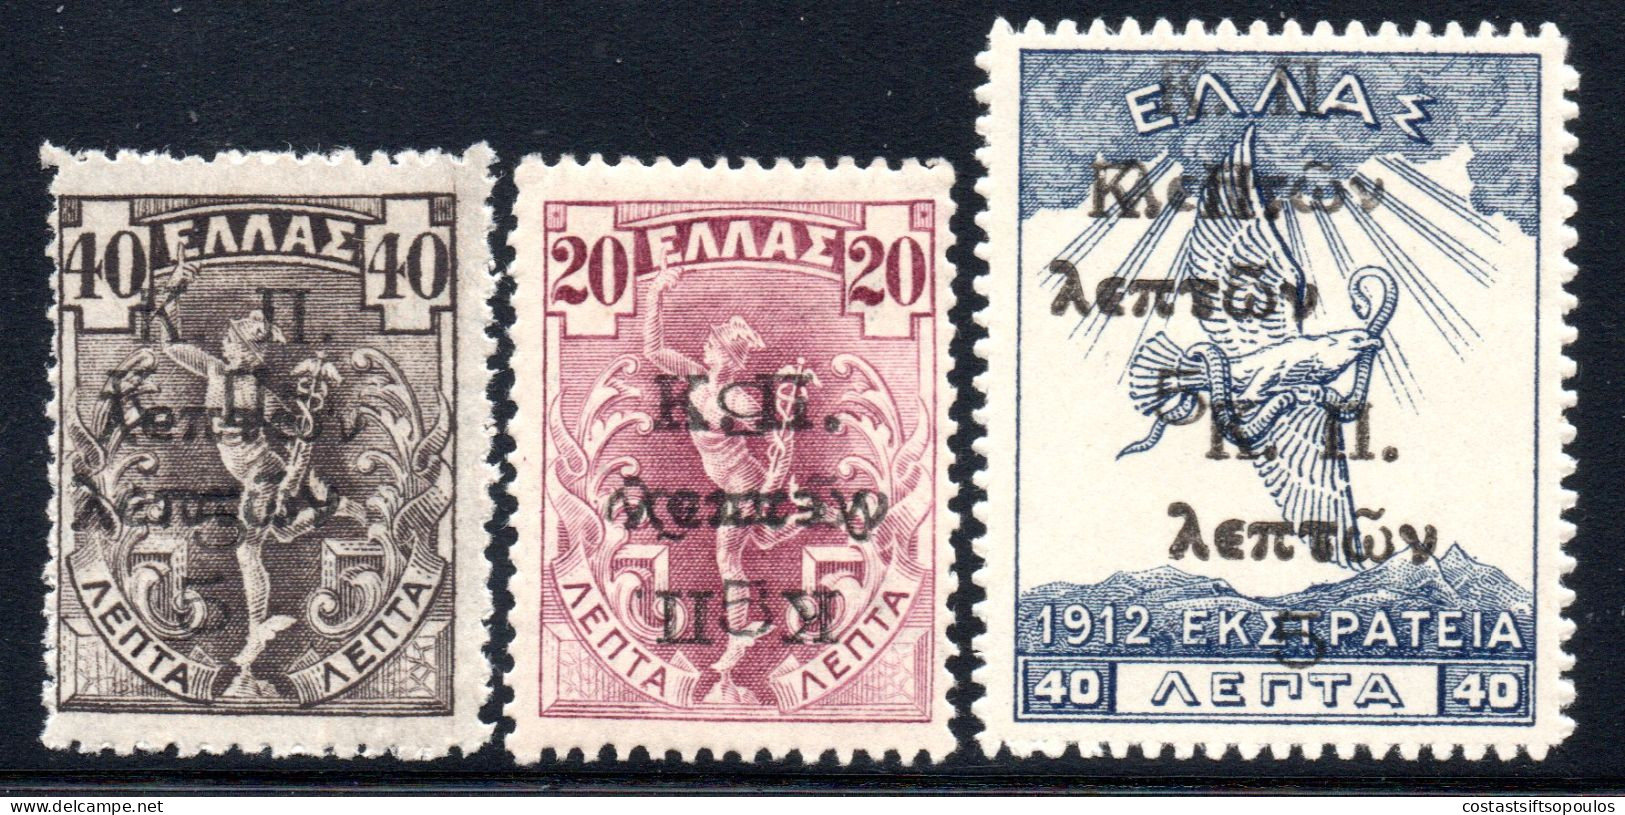 2702. GREECE 1917 3 CHARITY ST. LOT DOUBLE SURCHARGE MH - Liefdadigheid